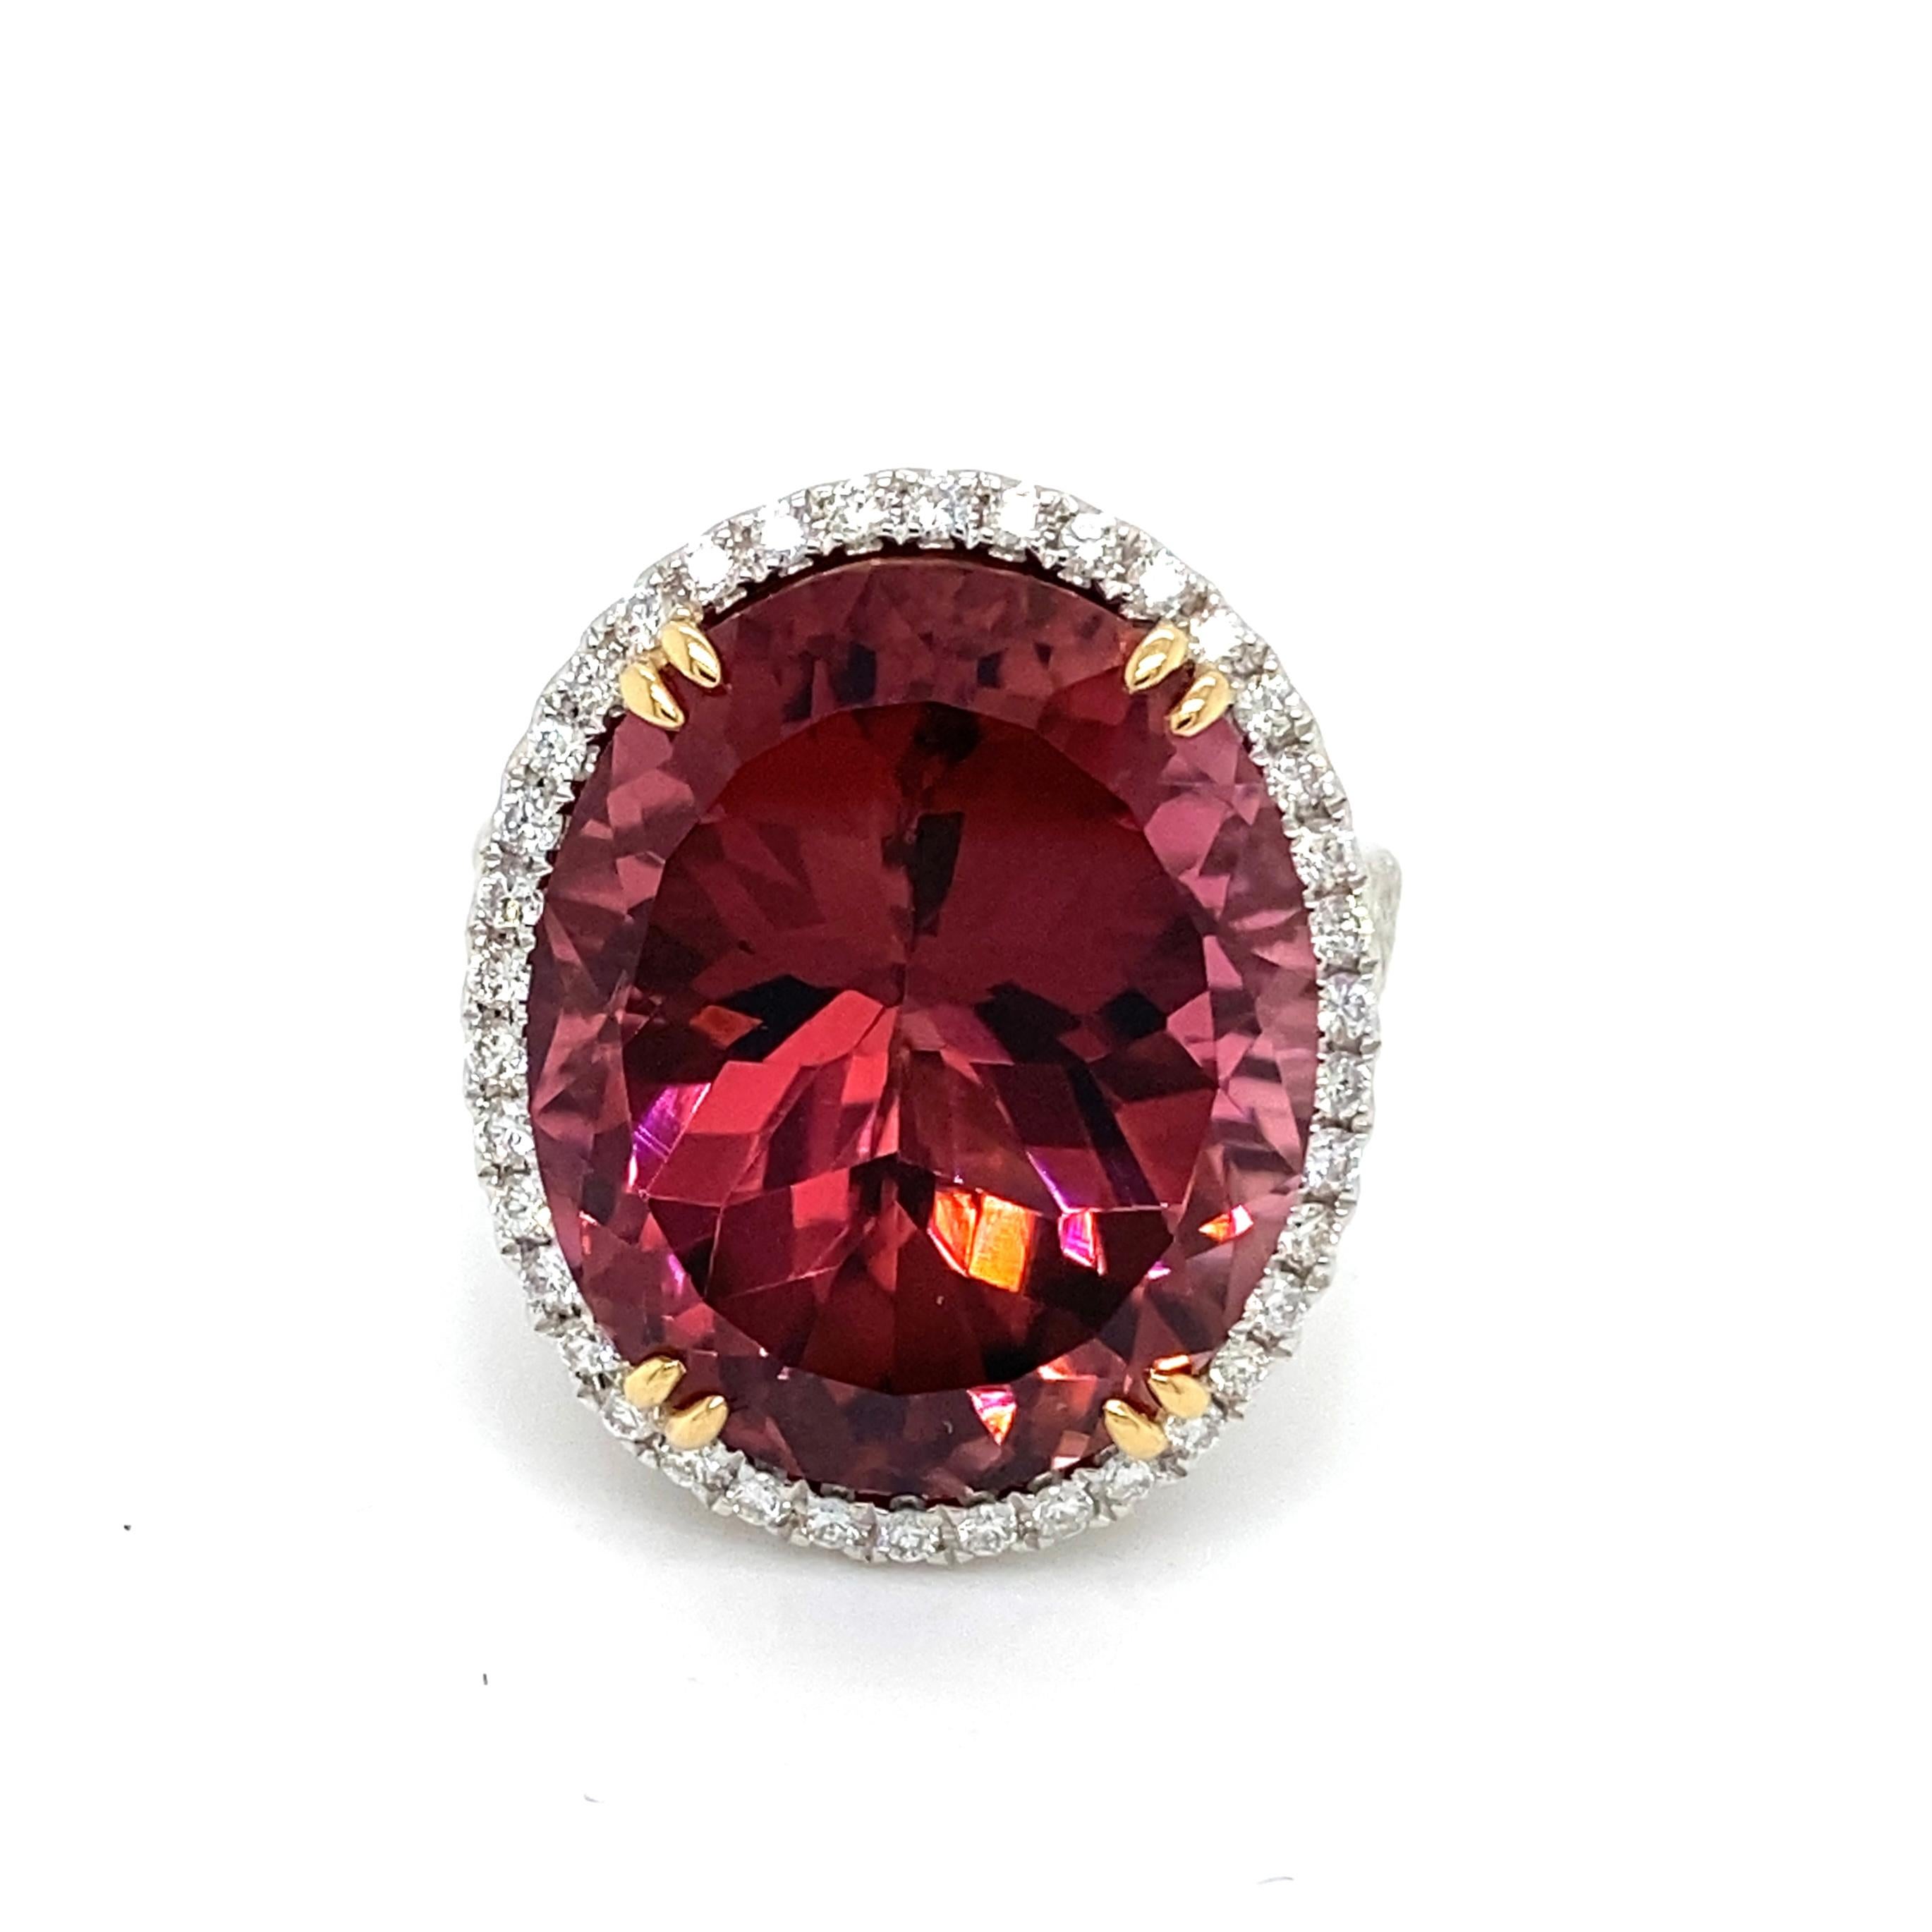 This stunning cocktail ring showcases a beautiful 18.79 Carat Oval Rubellite Tourmaline with a Diamond Halo on a Double Diamond Shank. This ring is set in 18k white gold, with 18k yellow gold prongs on the center stone.
Total Diamond Weight = 0.83